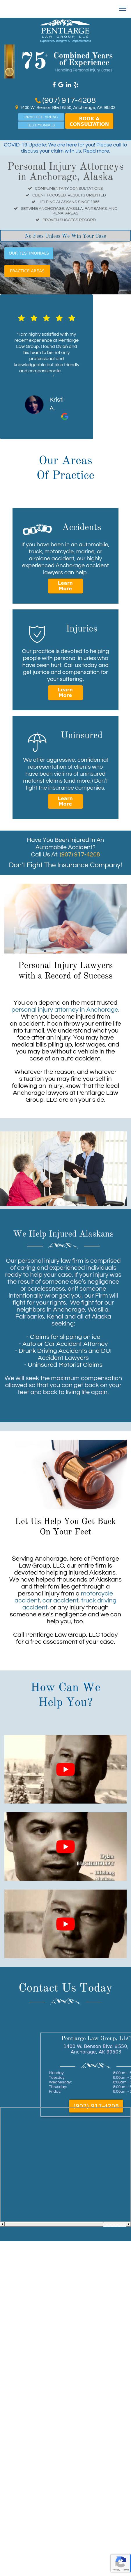 Dattan D Scott Law Offices Of - Anchorage AK Lawyers